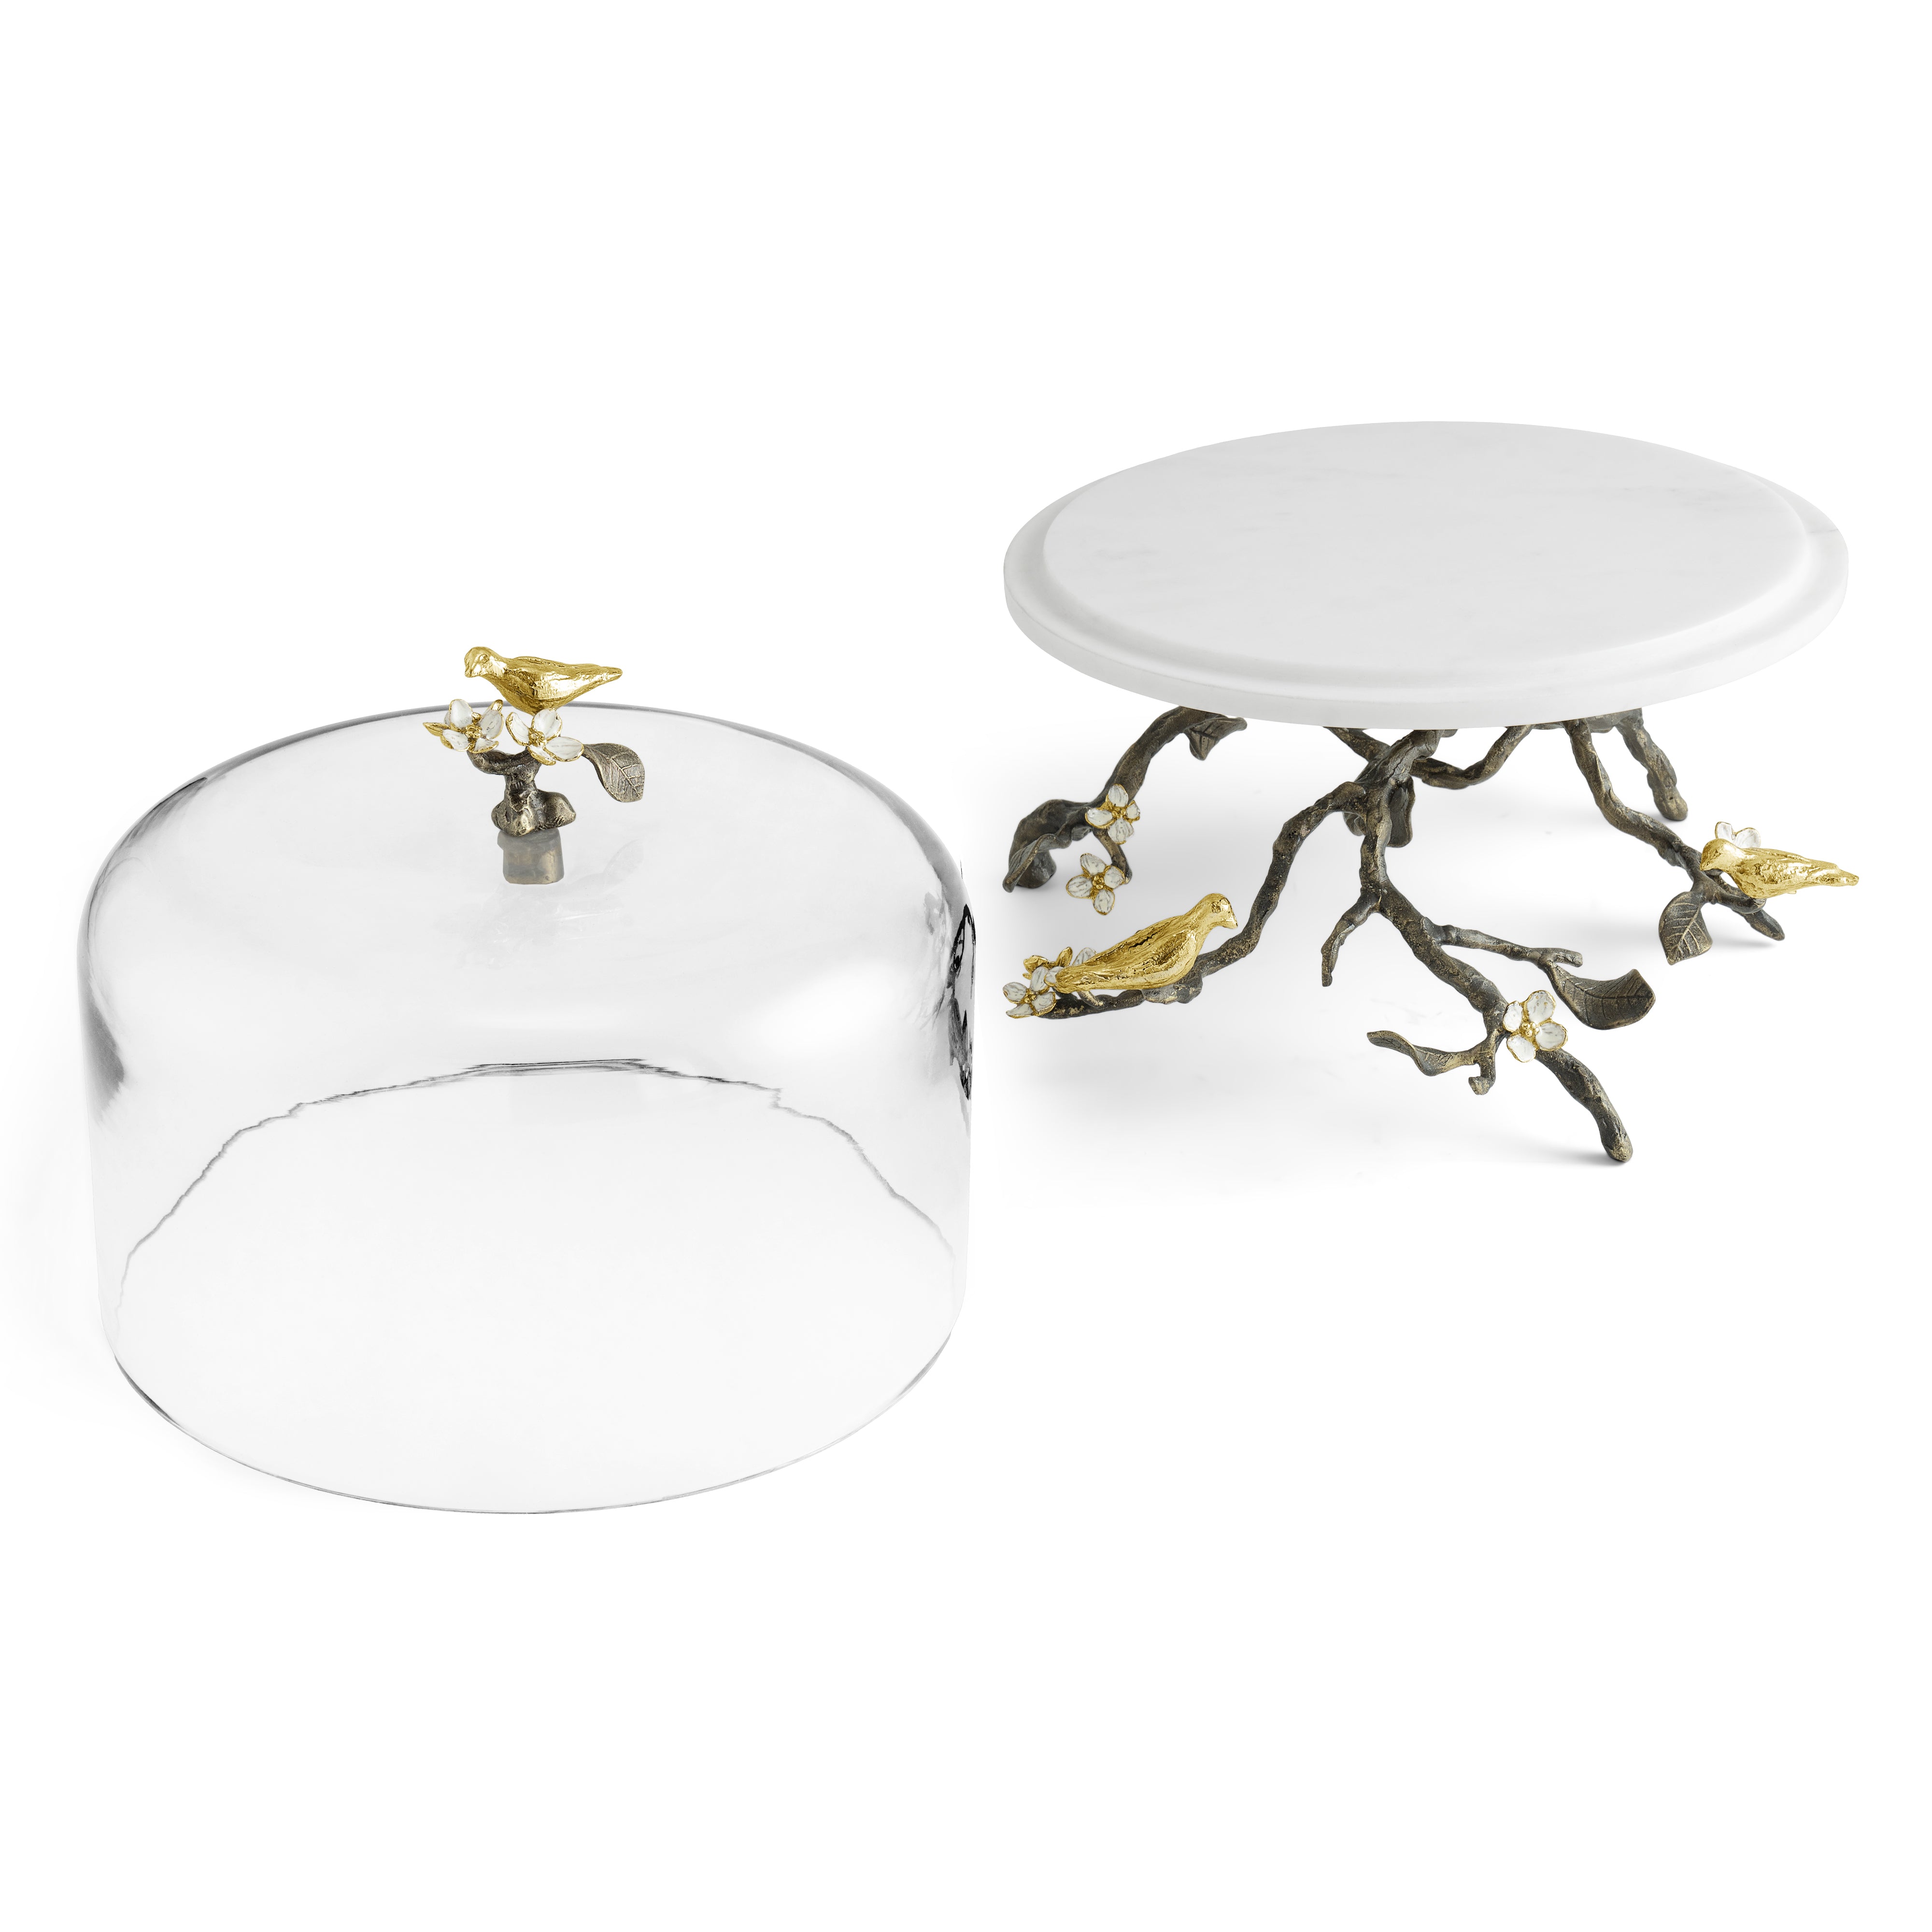 Lovebirds Cake Stand with Dome